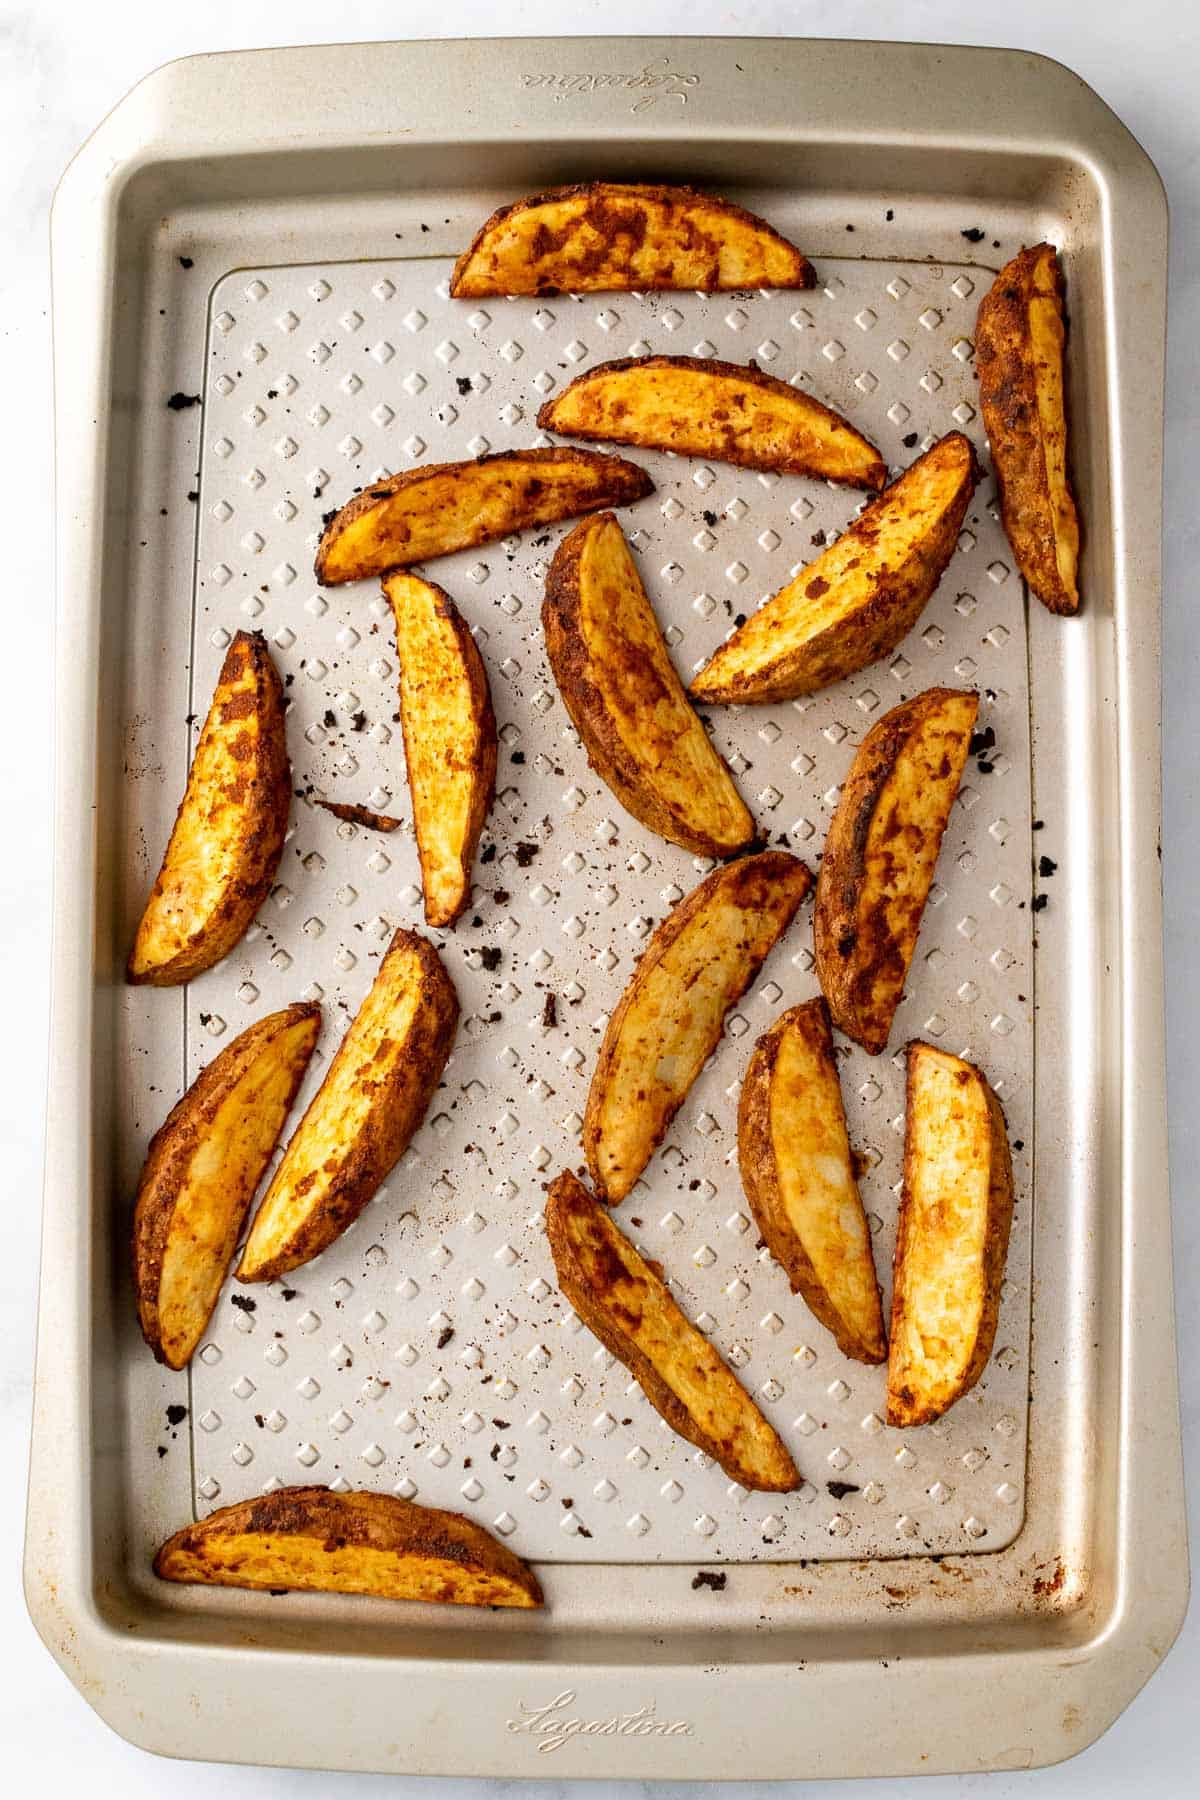 Baked French fries on a aluminum baking sheet